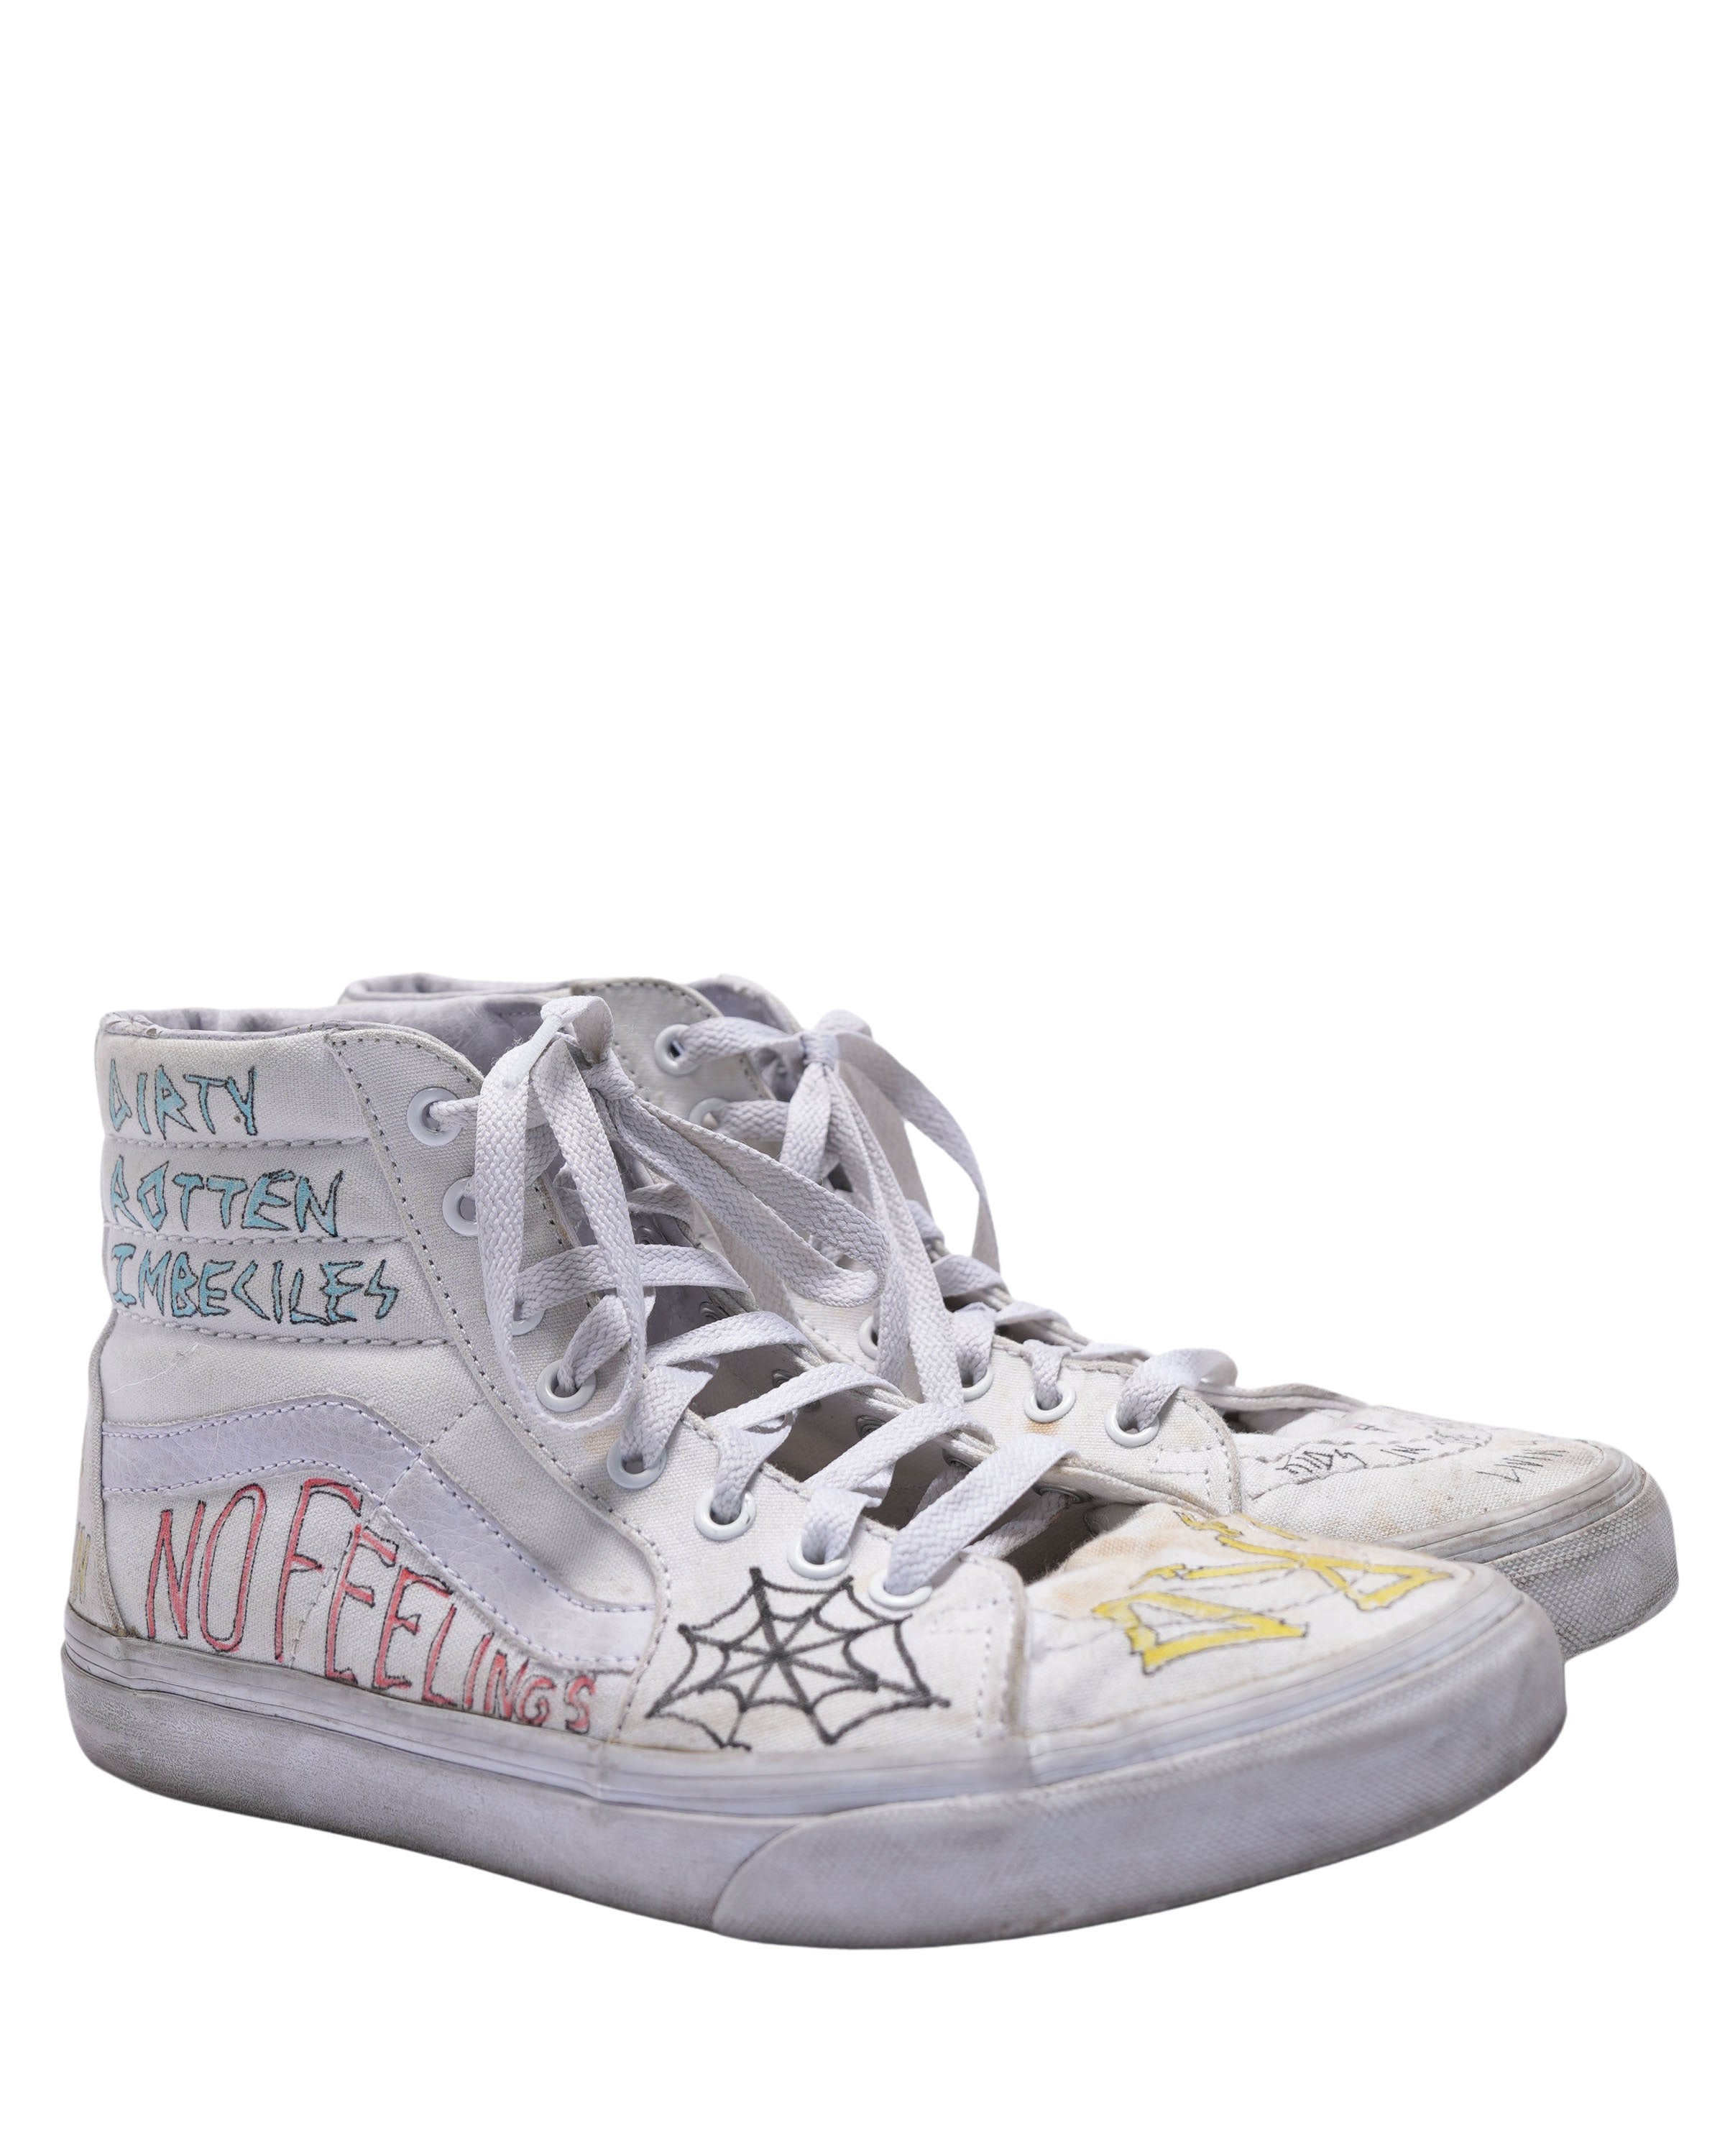 Vans Hand Painted First Edition Sk8 Hi